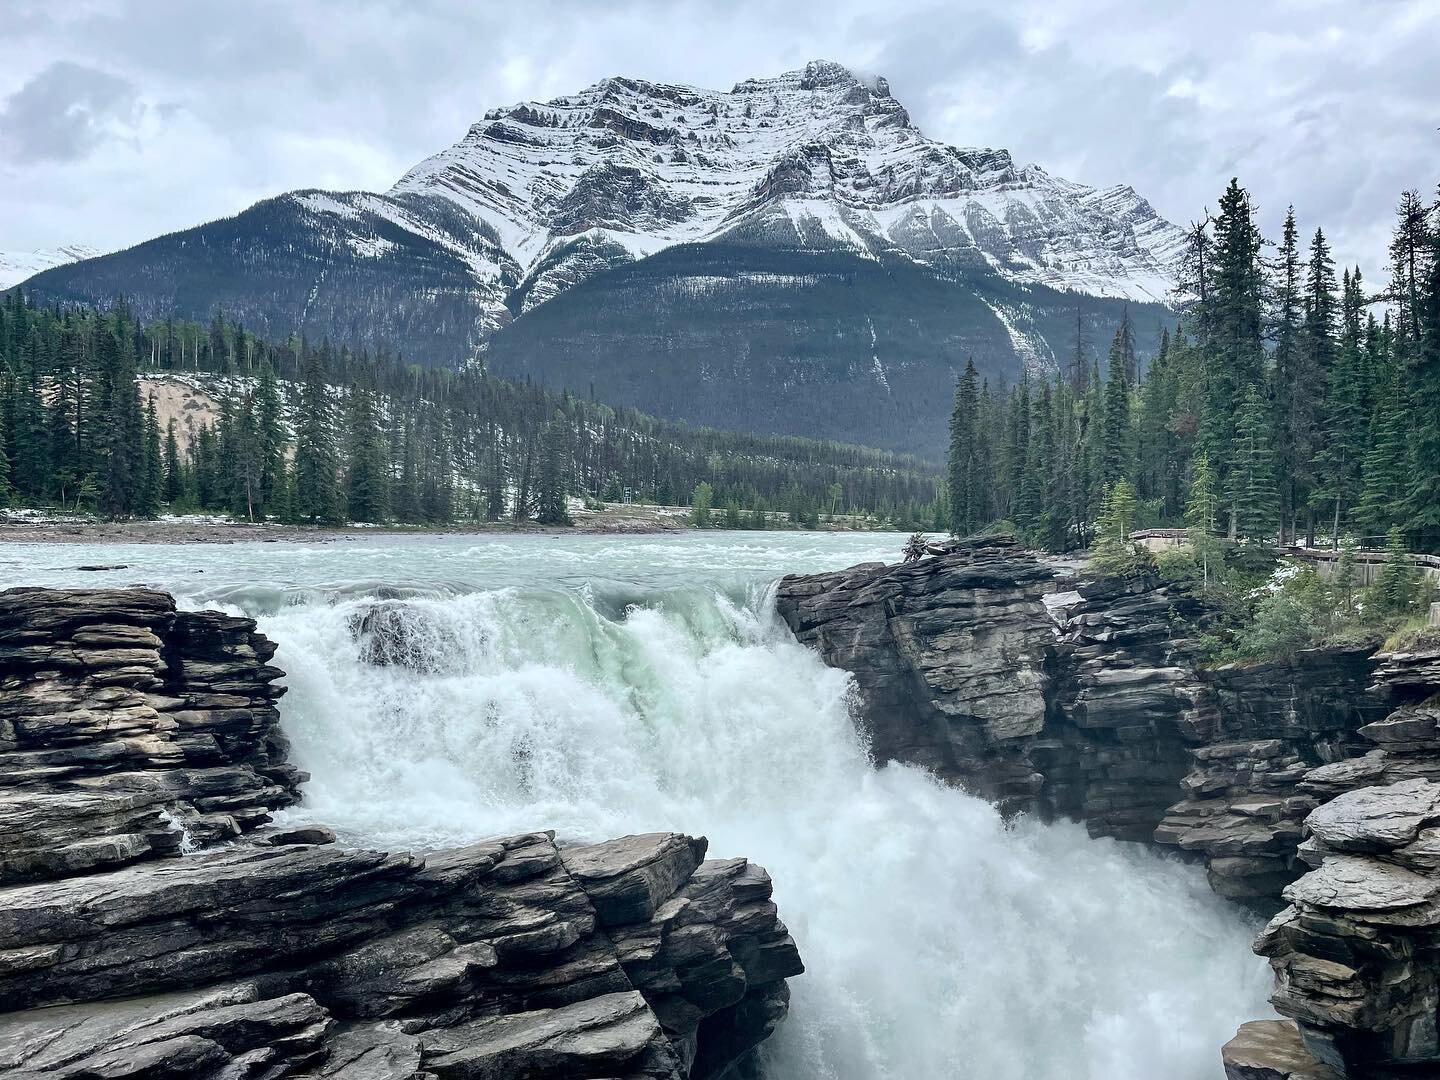 Day 8-10: Jasper National Park

This was probably my favorite, especially the Icefields Parkway. The last picture is snow in June. ❄️

#jaspernationalpark #jasperalberta #albertacanada #icefieldsparkway